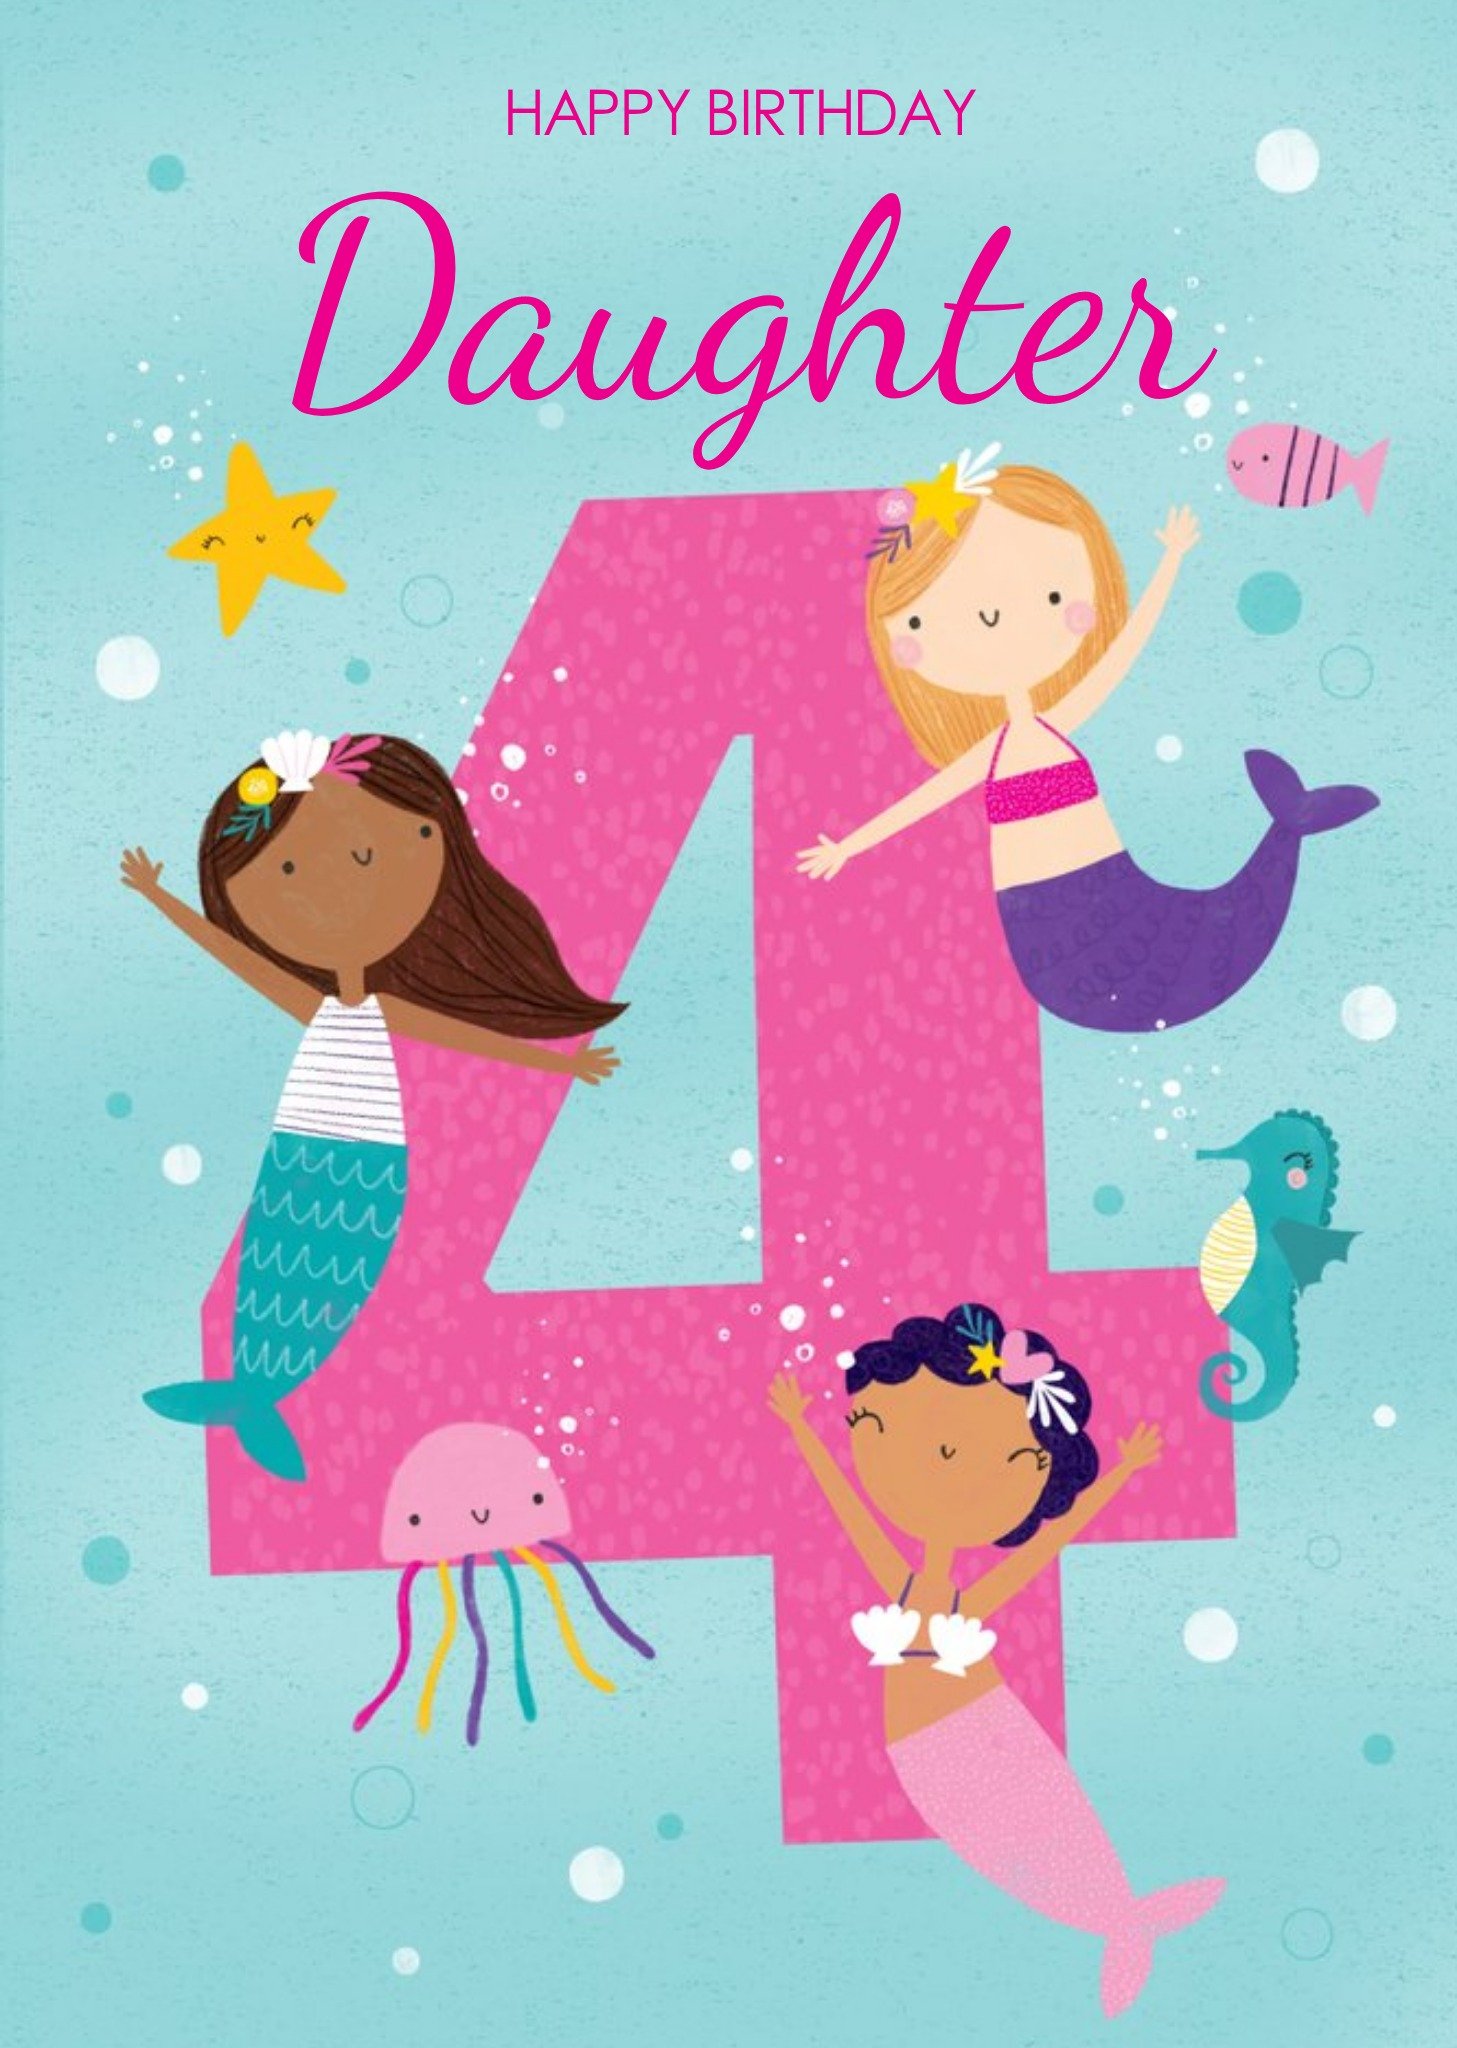 Moonpig Mermaid Daughter Fun 4th Birthday Card From Paperlink, Large